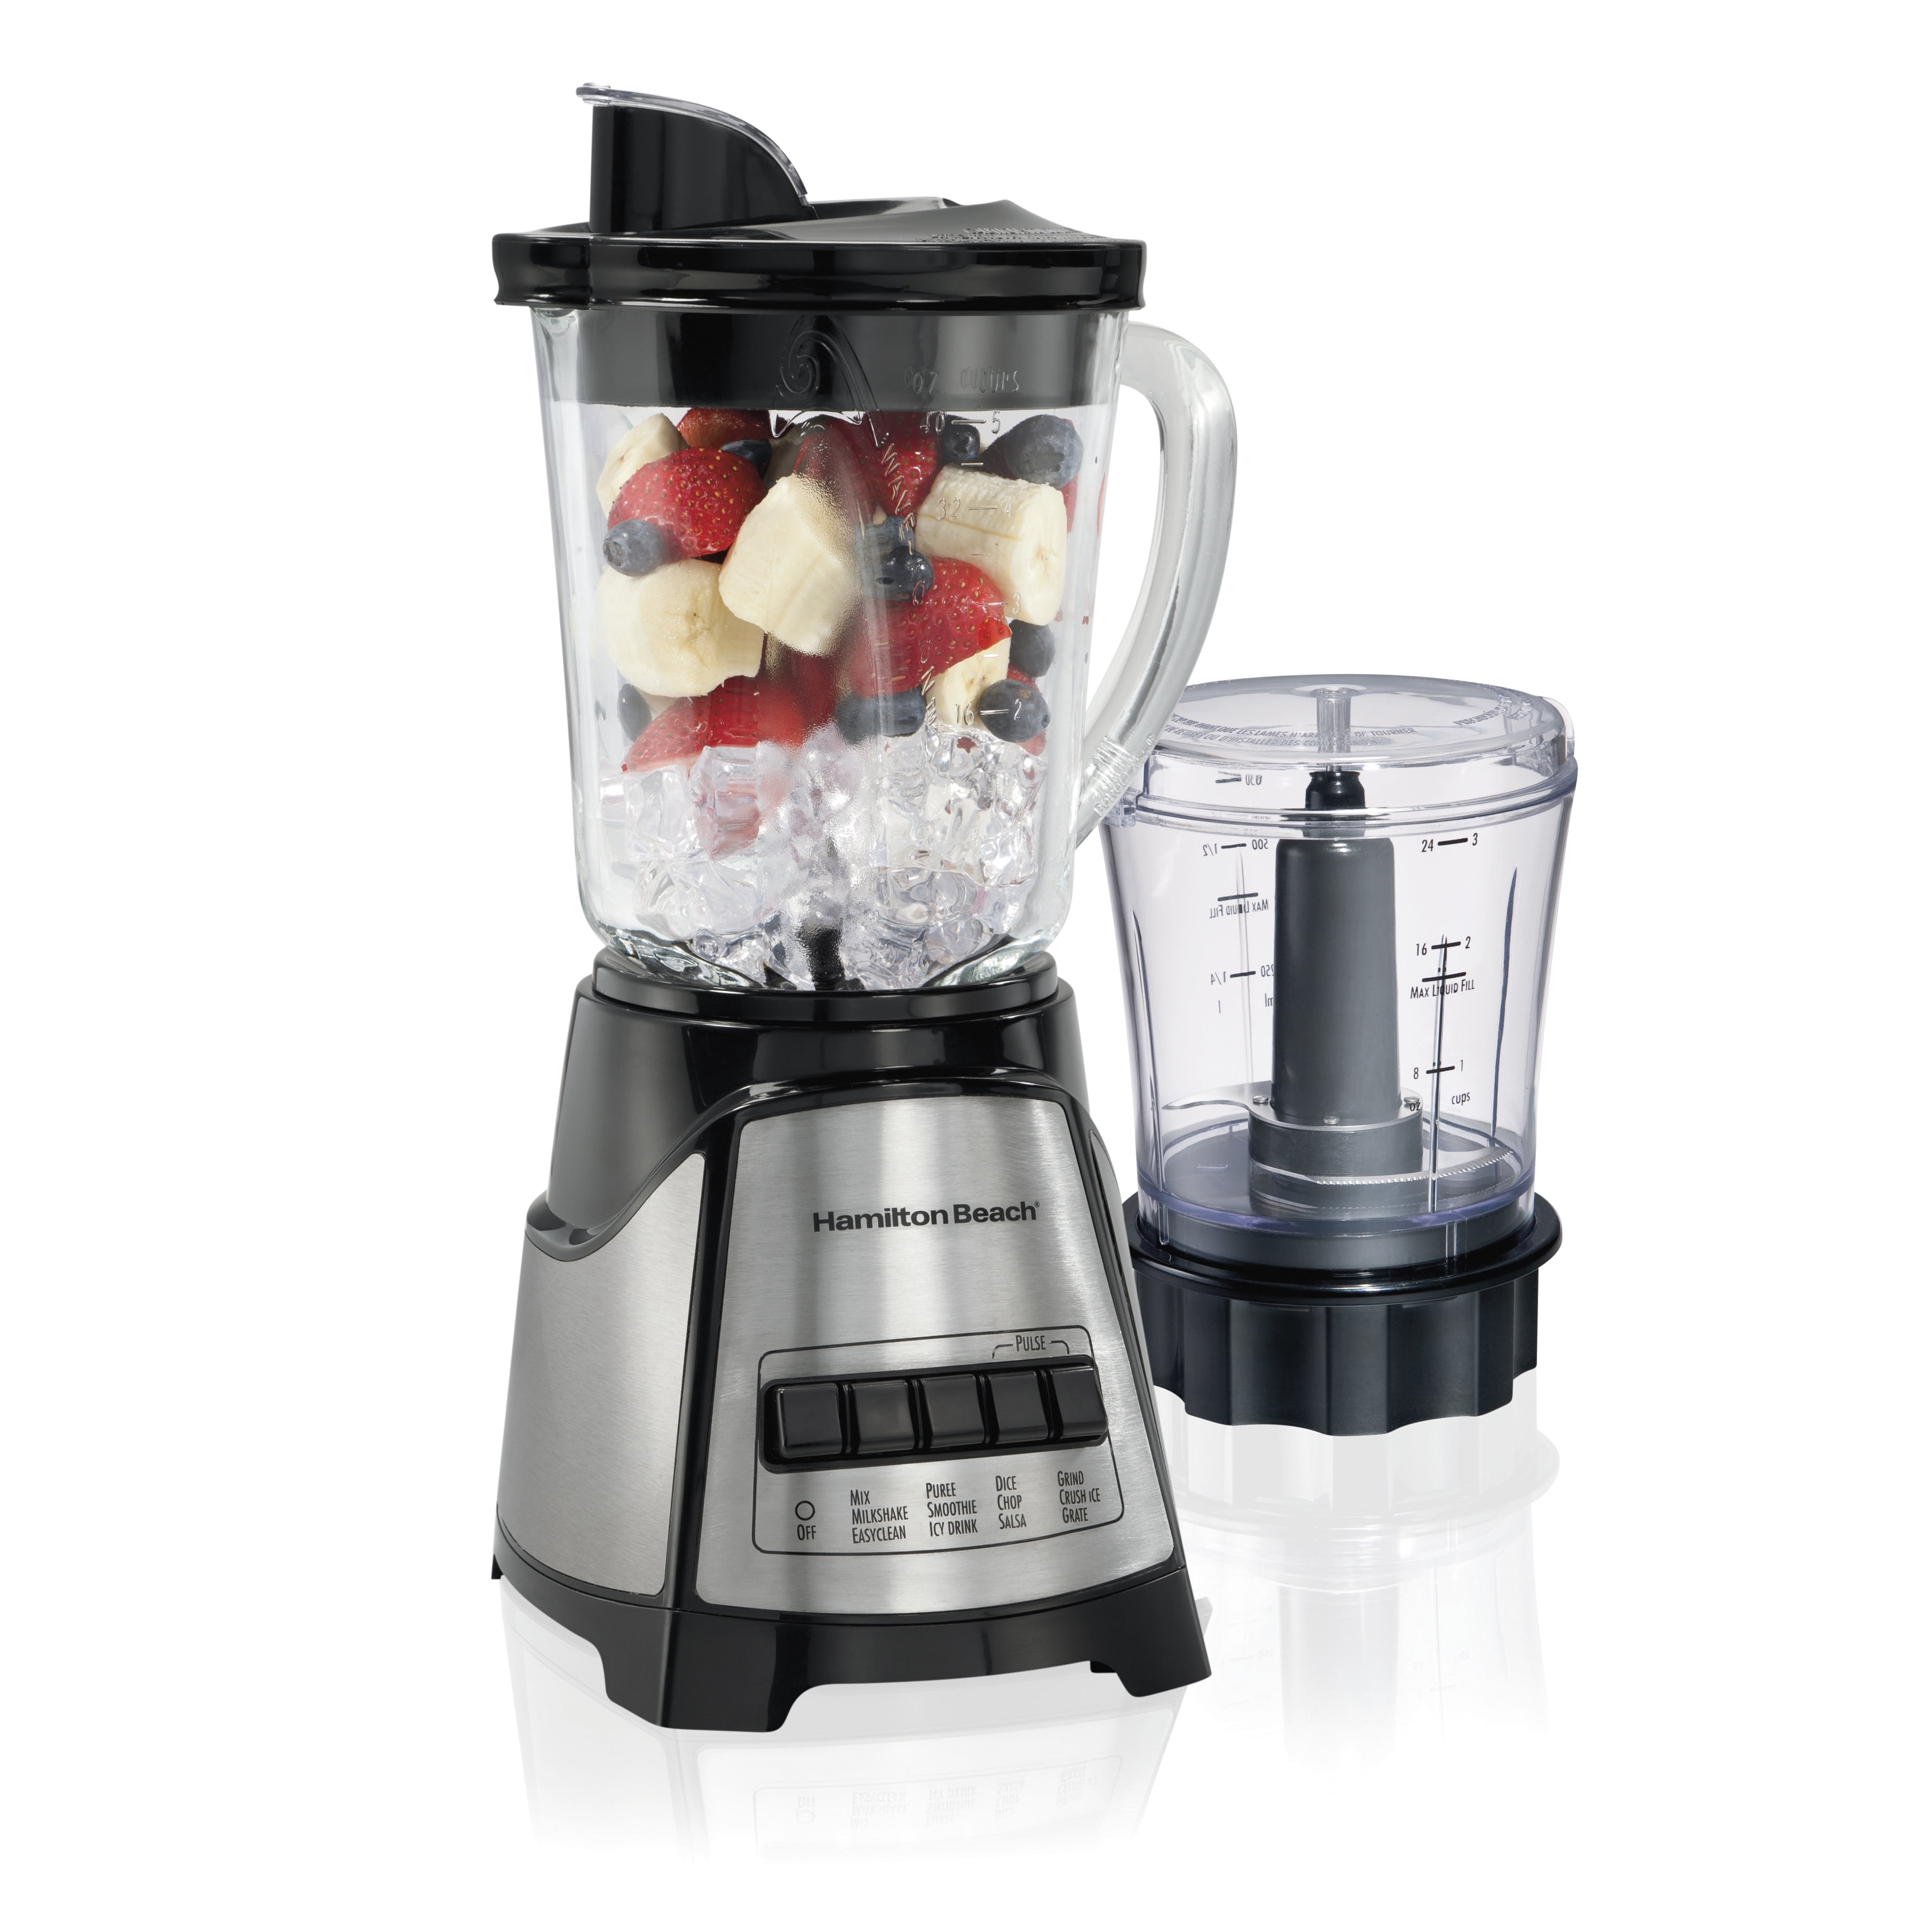 Hamilton Beach 12 Function Blender and Chopper with Mess-Free 40oz Glass Jar, 700W, Black and Stainless, 58149